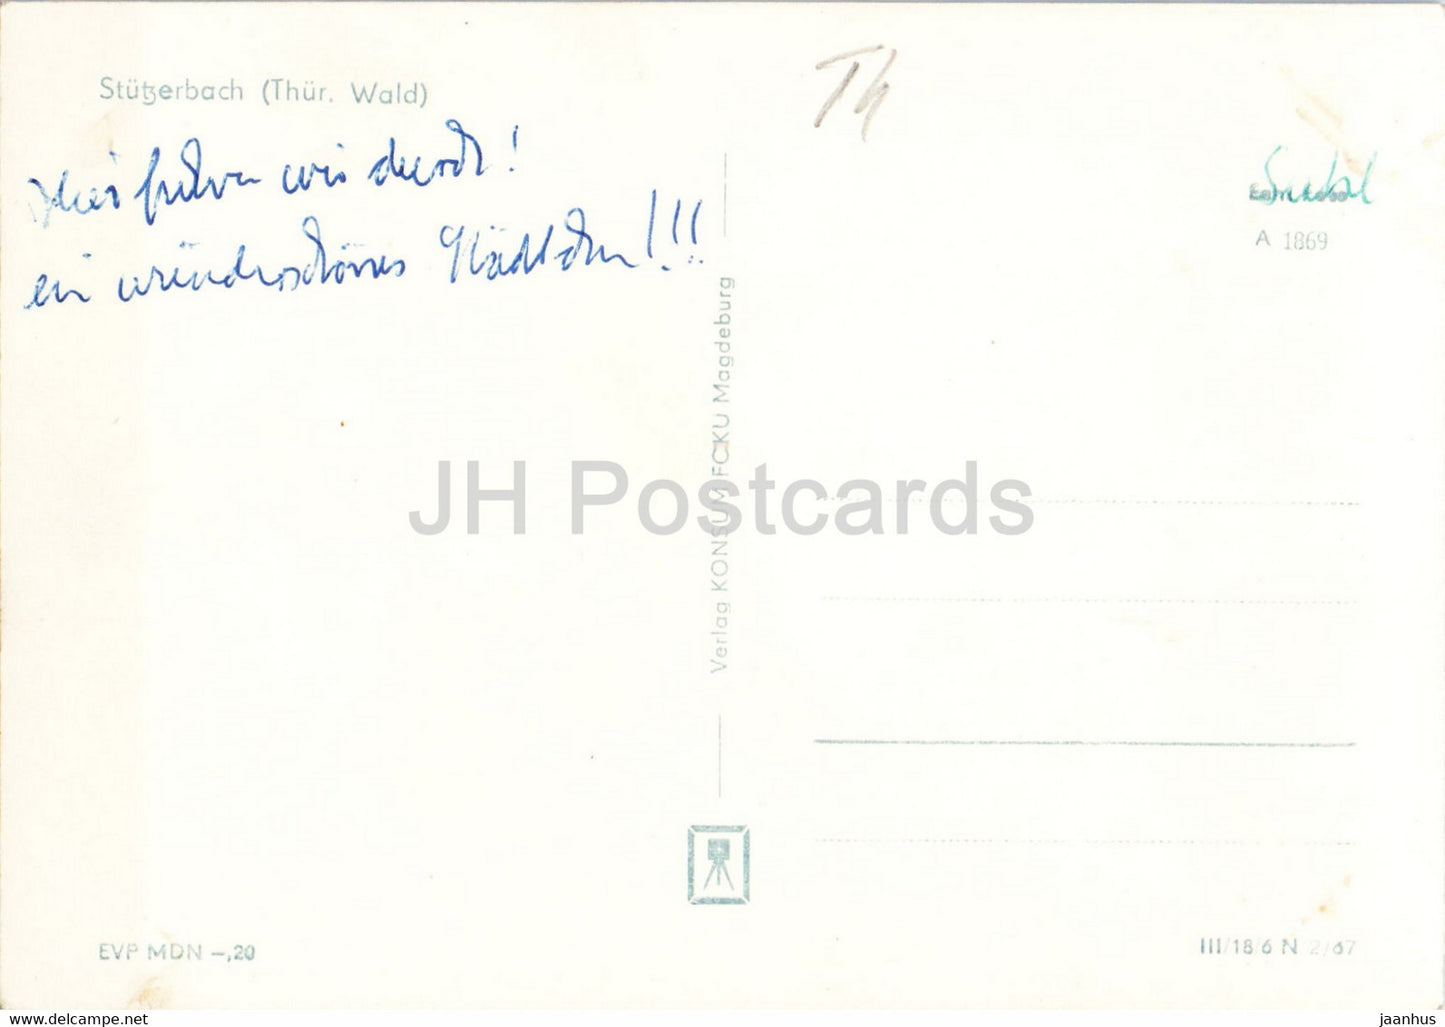 Stutzerbach - Thur Wald - old postcard - Germany DDR - used